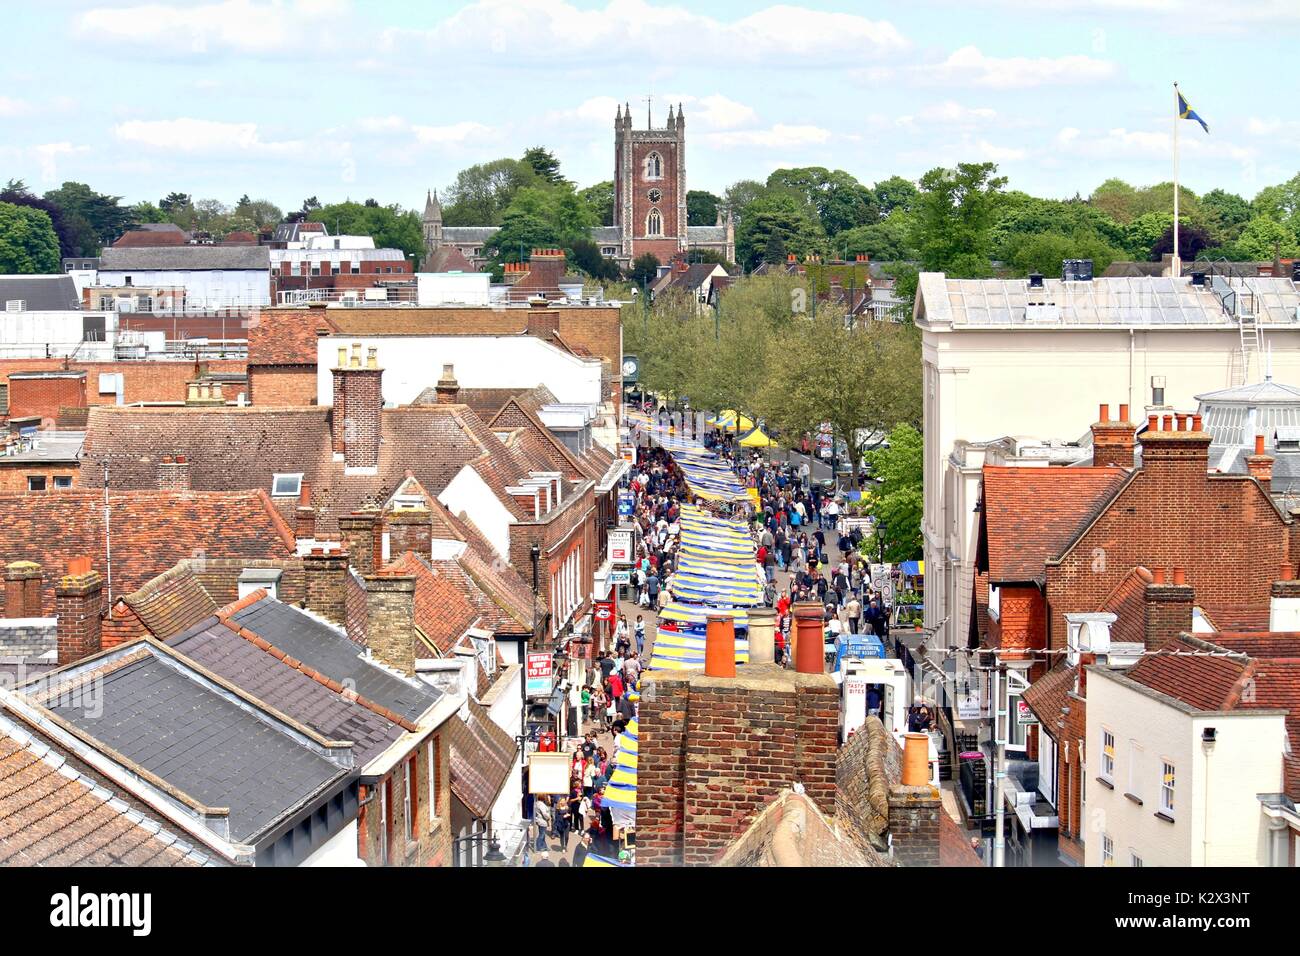 St. Peters Church Viewed from the Clock Tower, St. Albans Stock Photo